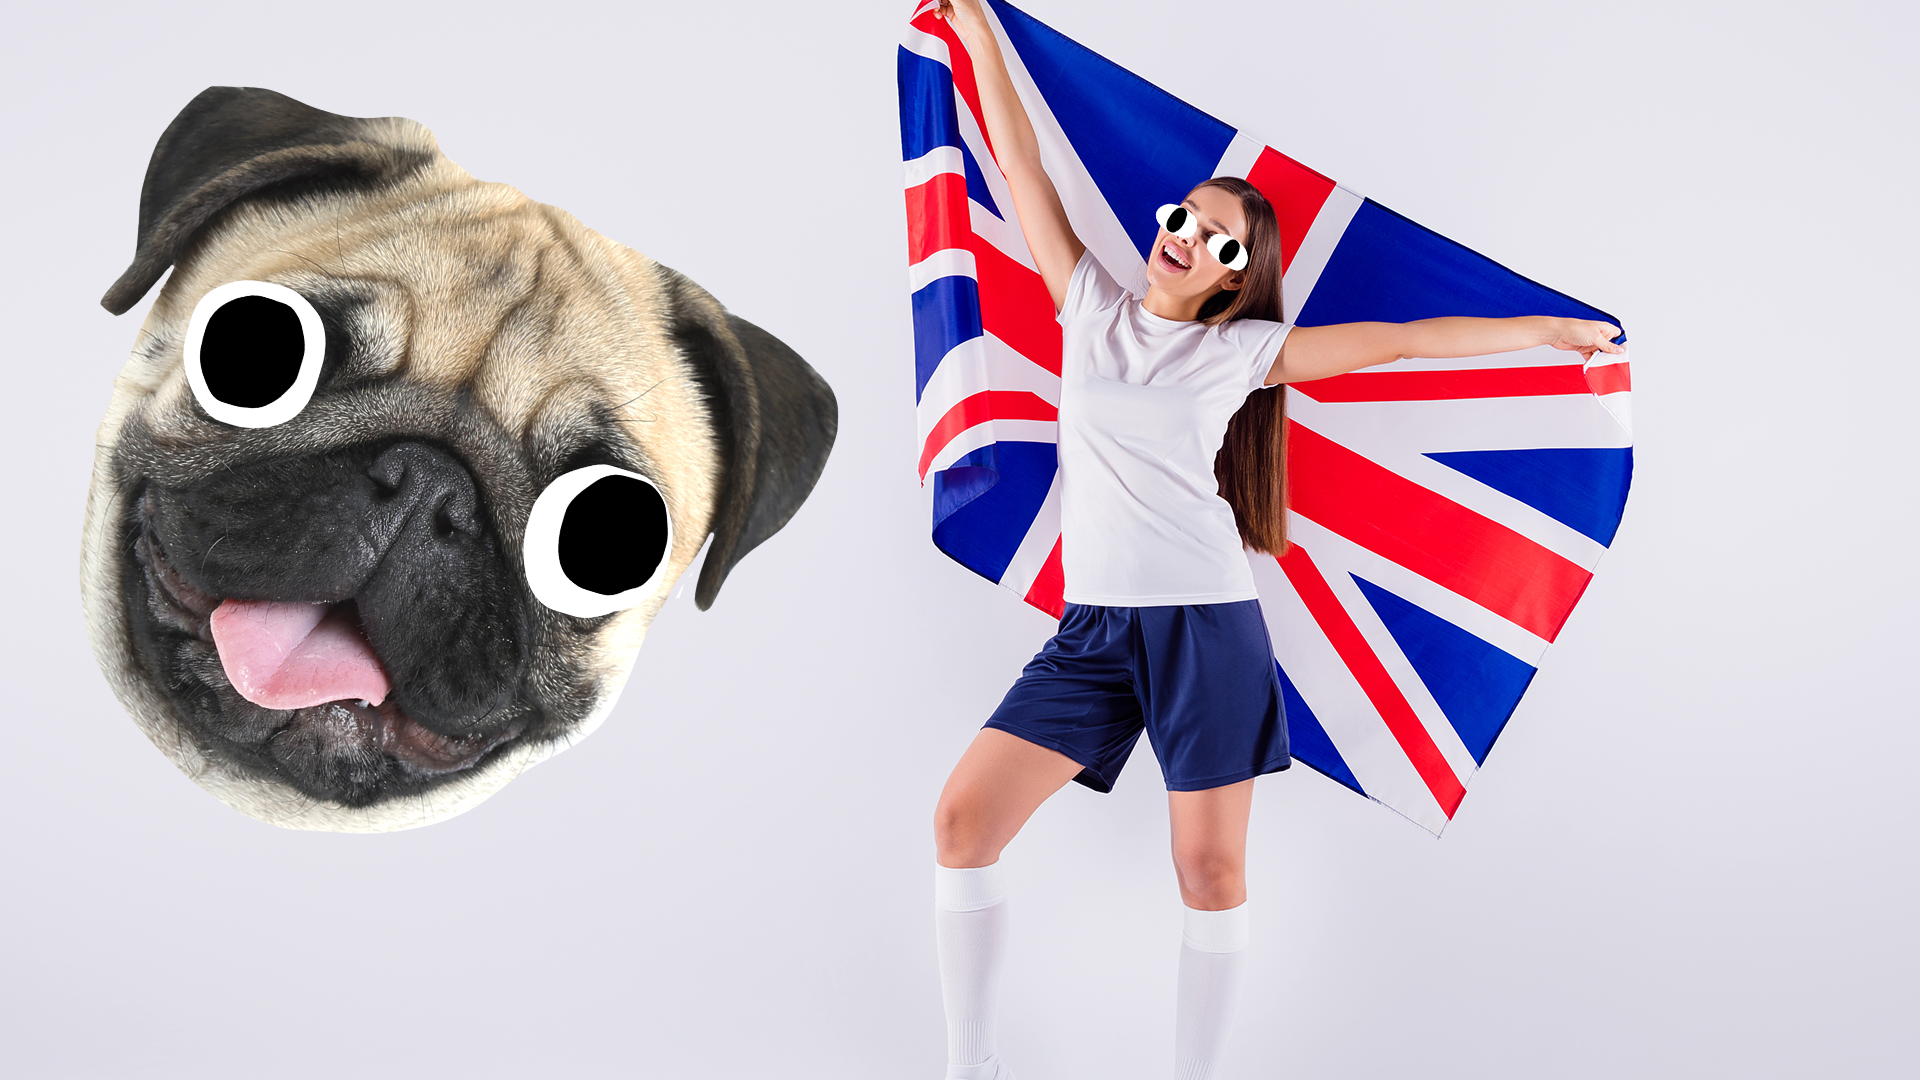 Woman with UK flag on white background with derpy dog face